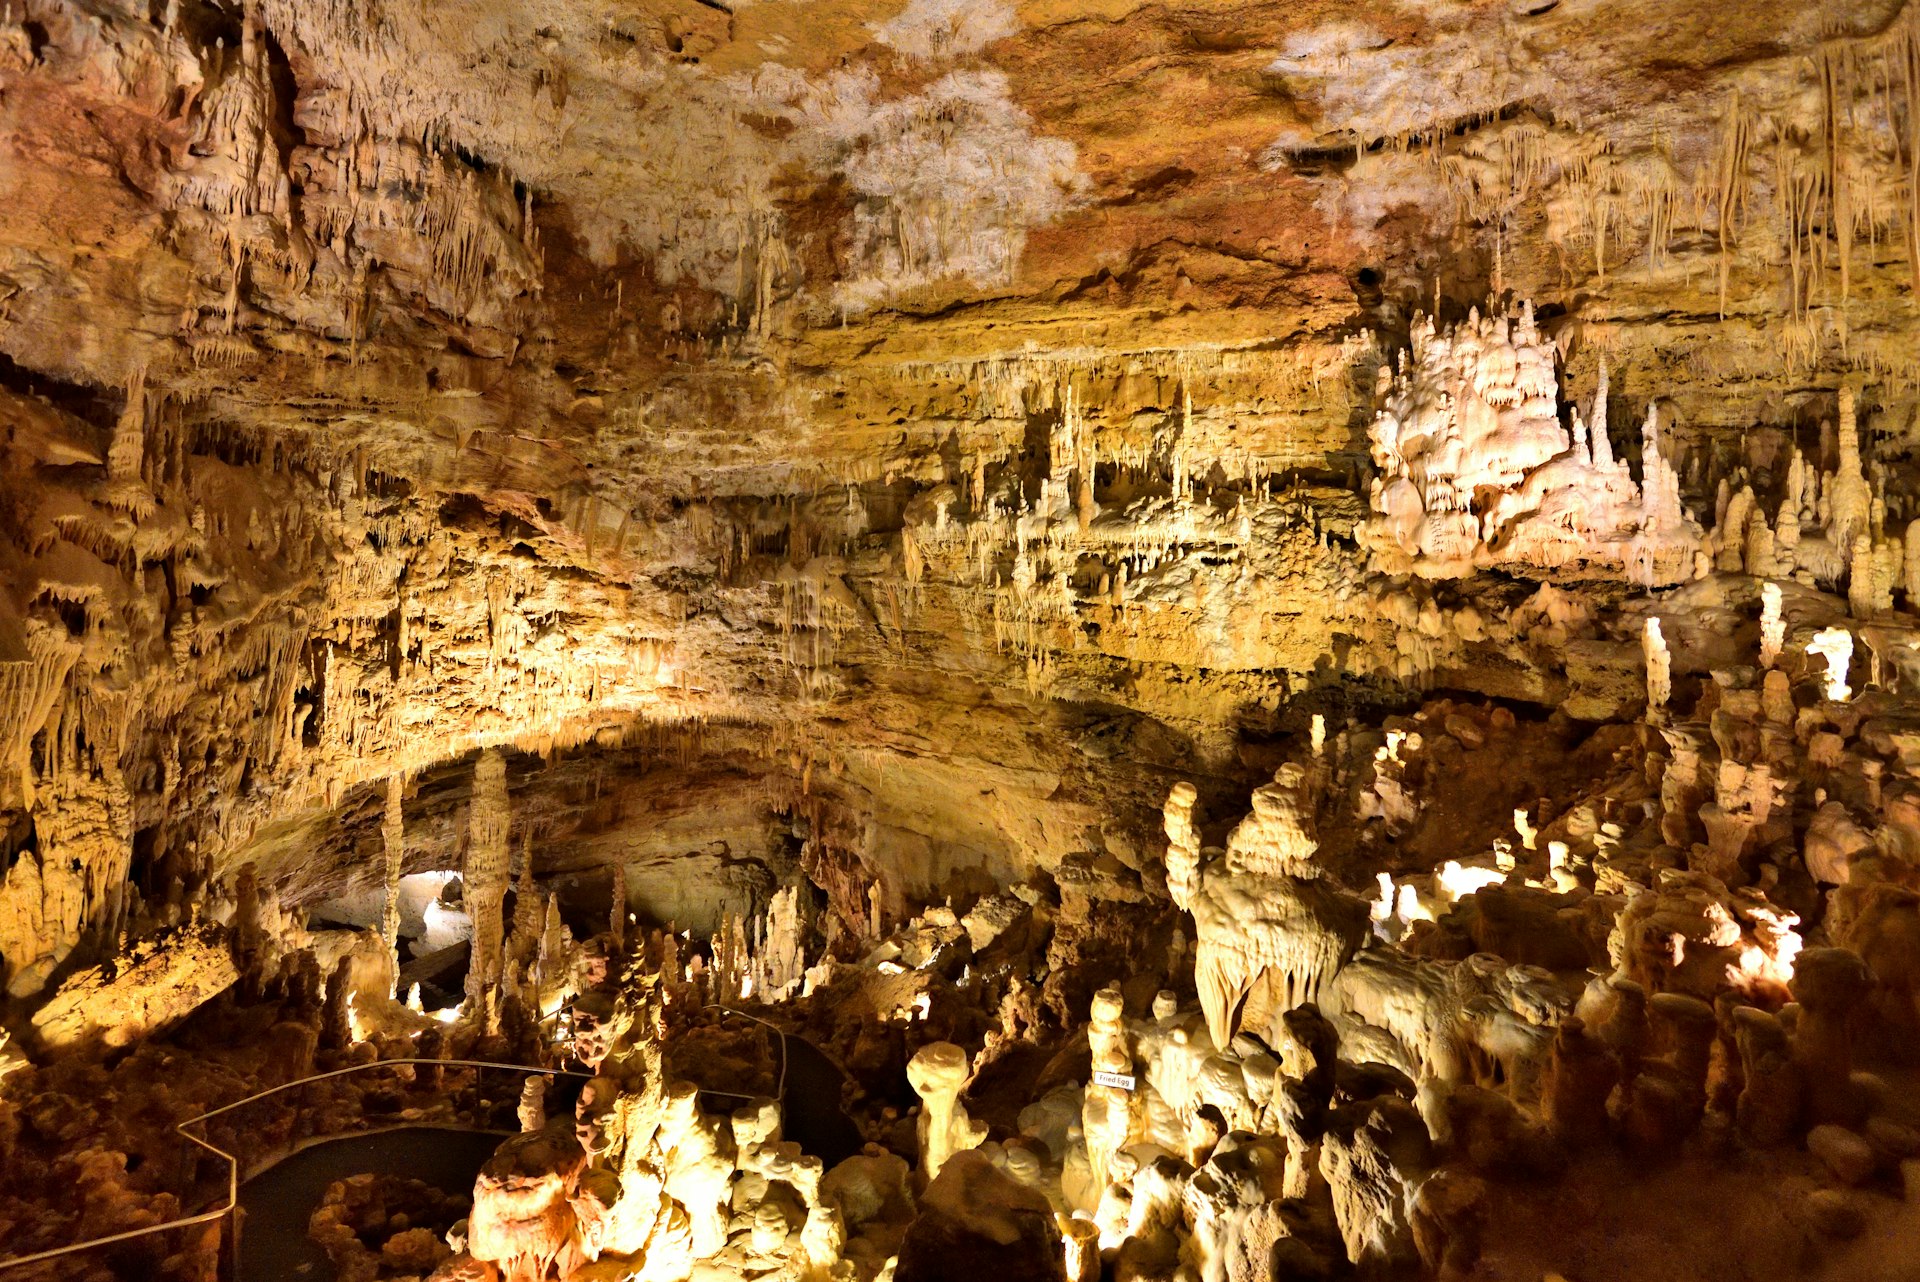 A cavern with an intricate web of stalactites and stalagmites